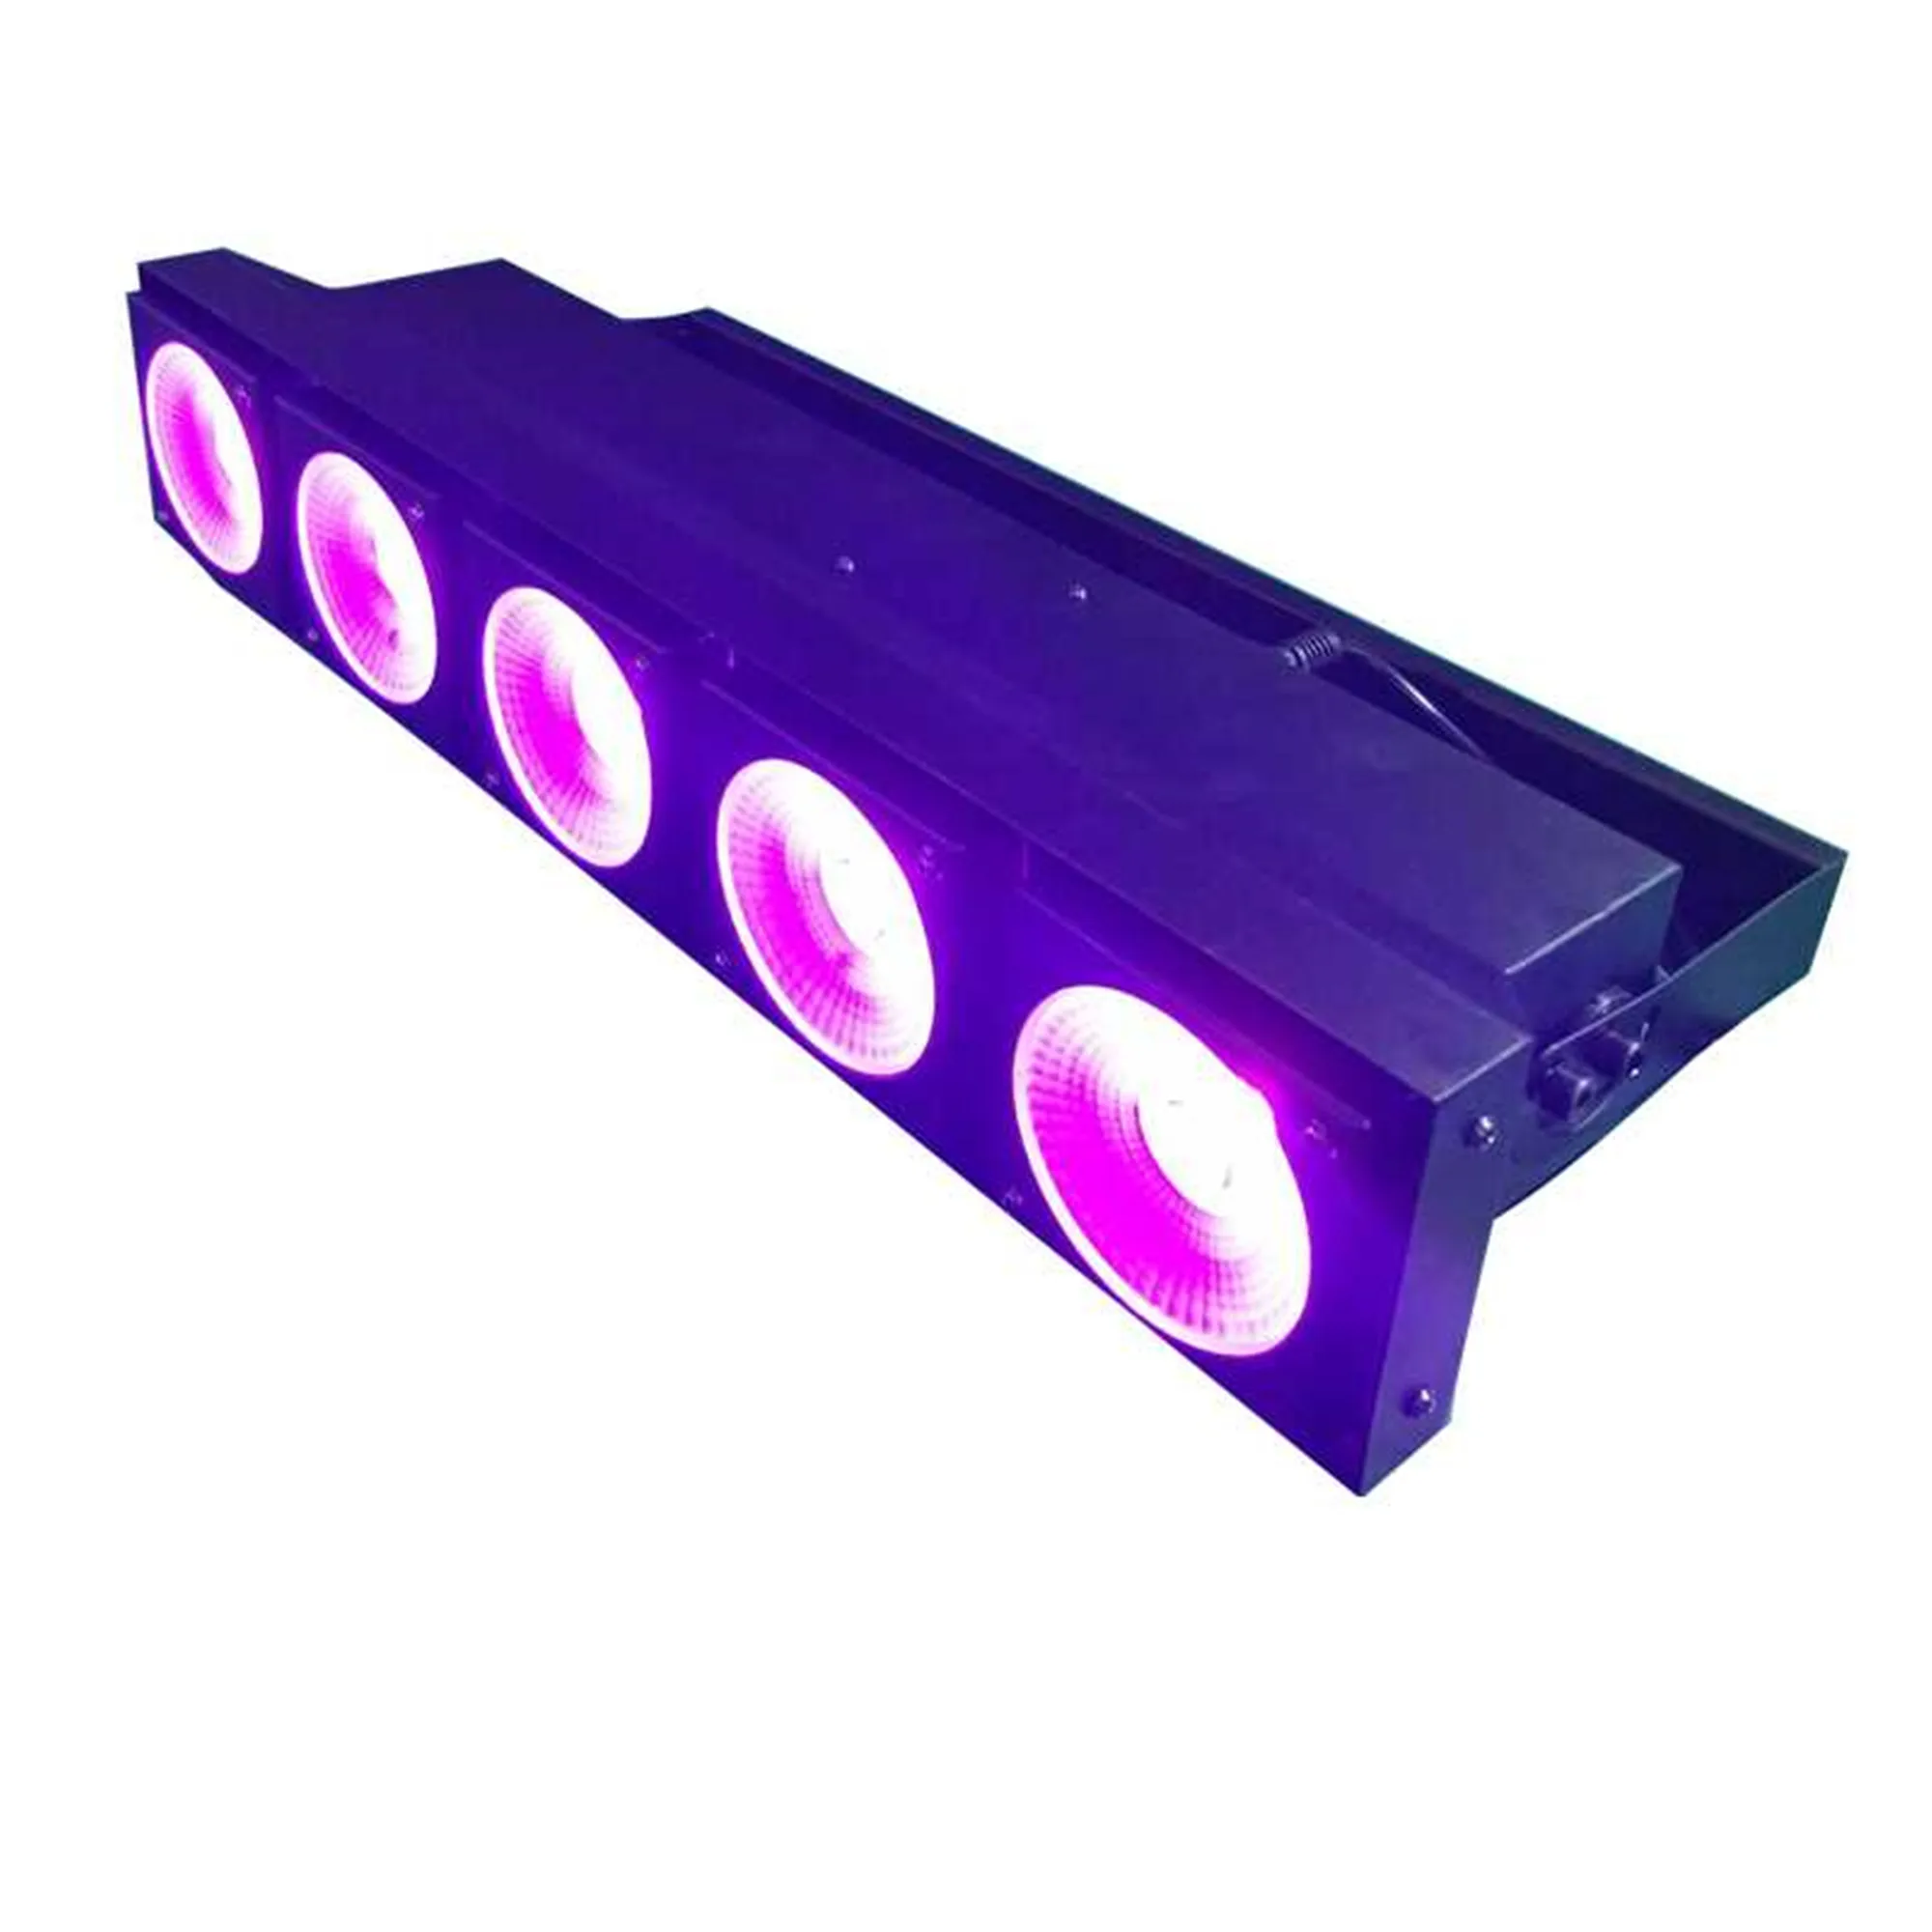 LED stage light five-head matrix light professional DMX is suitable for disco music parties, etc. to adjust the atmosphere